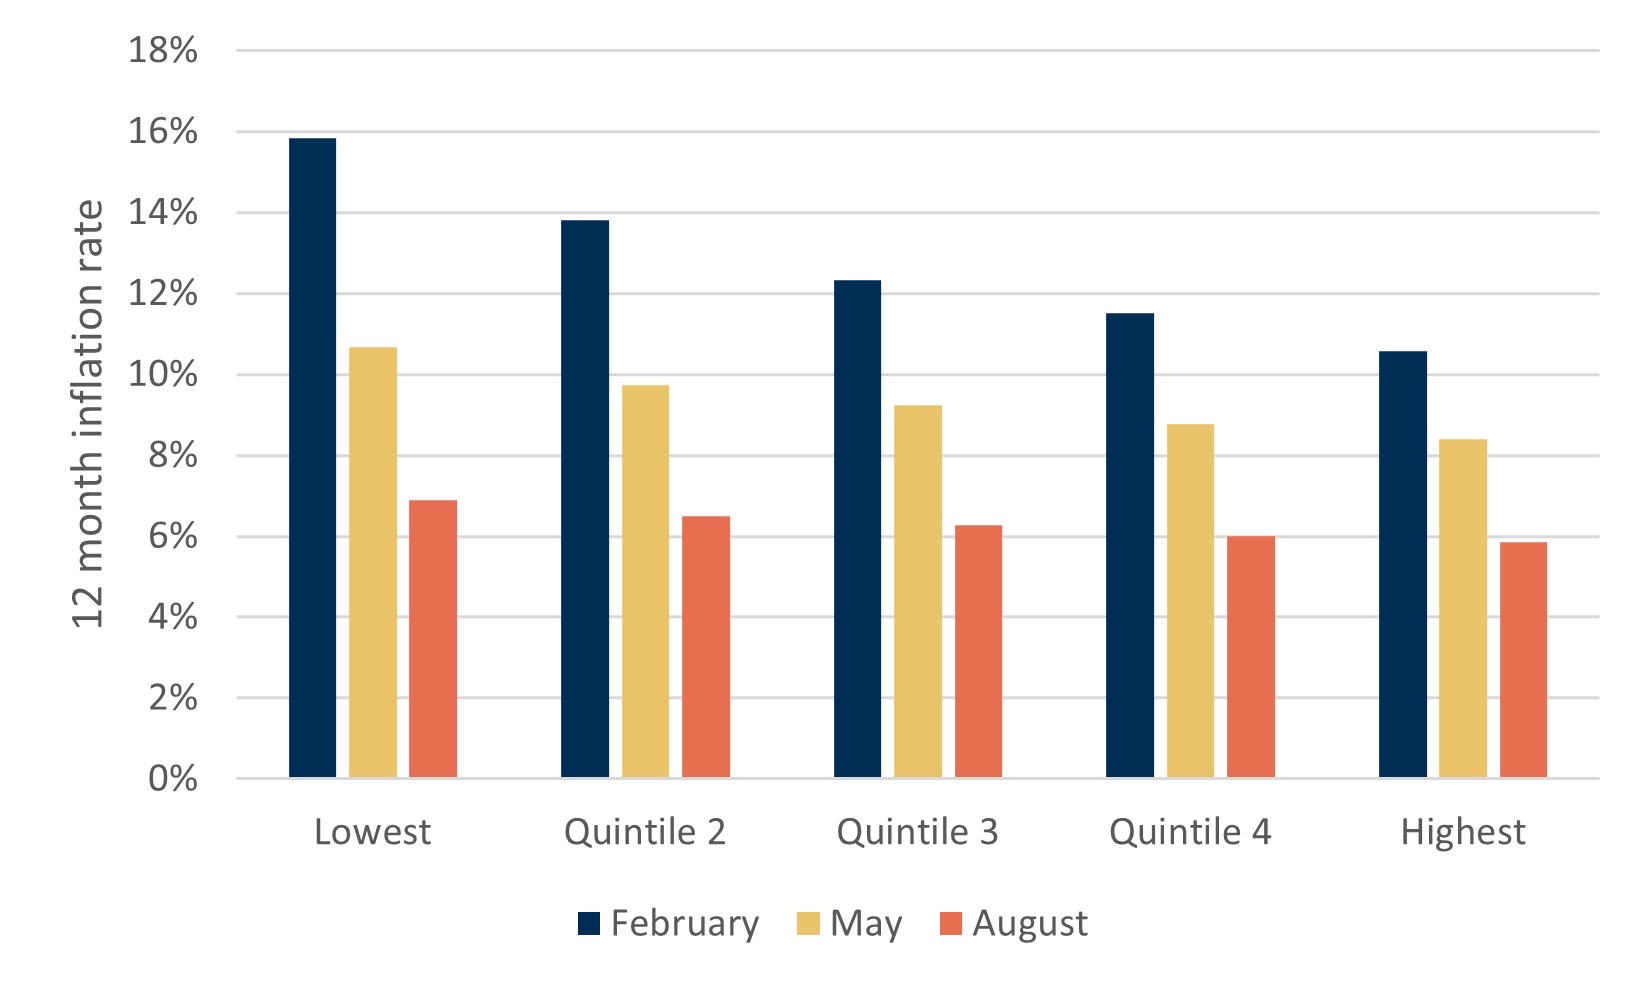 Bar chart showing the rate of inflation in February, May and August 2023 for five household income quintiles. For the lowest income quintile, the rate of inflation fell from 15.8% in February to 6.9% in August, and for the highest income quintile from 10.6% in February to 5.9% in August.